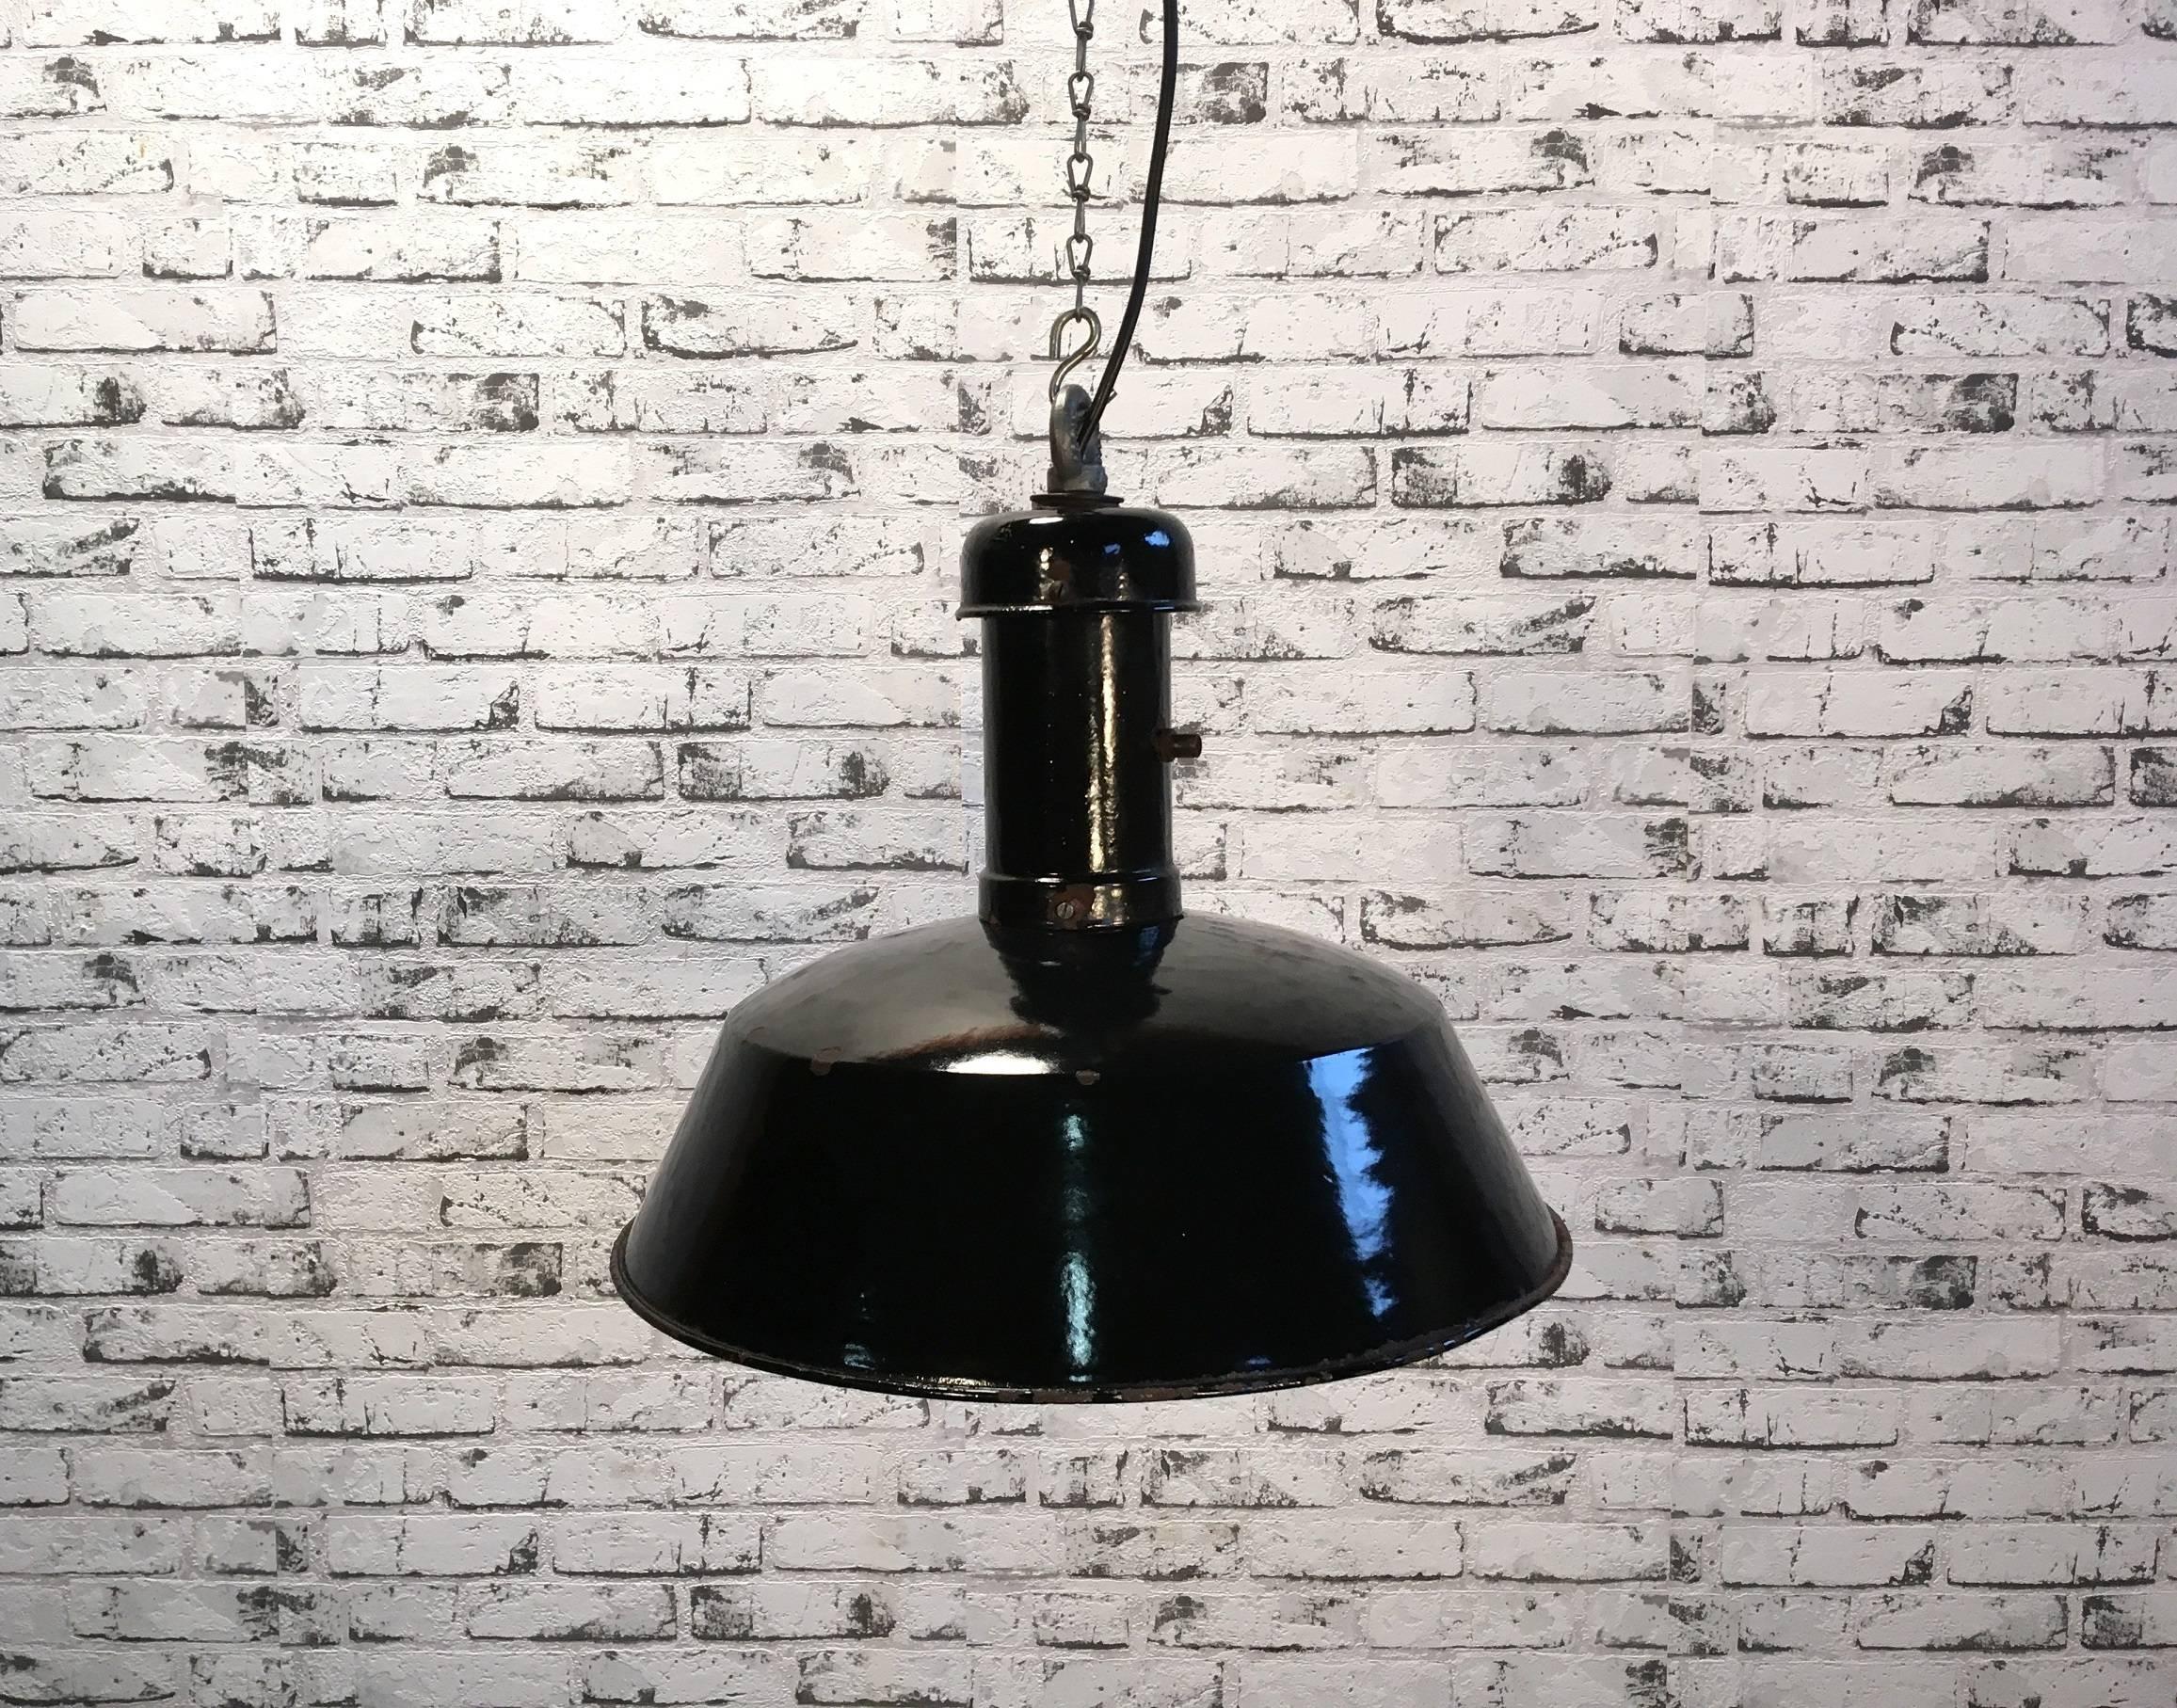 Pendant lamp from former Czechoslovakia, previously used in a factories.
Made from enamelled metal. Black outside, white interior. Interesting top.
New porcelain socket for  E 27 lightbulbs and wire. Good vintage condition.
Weight: 3 kg.
